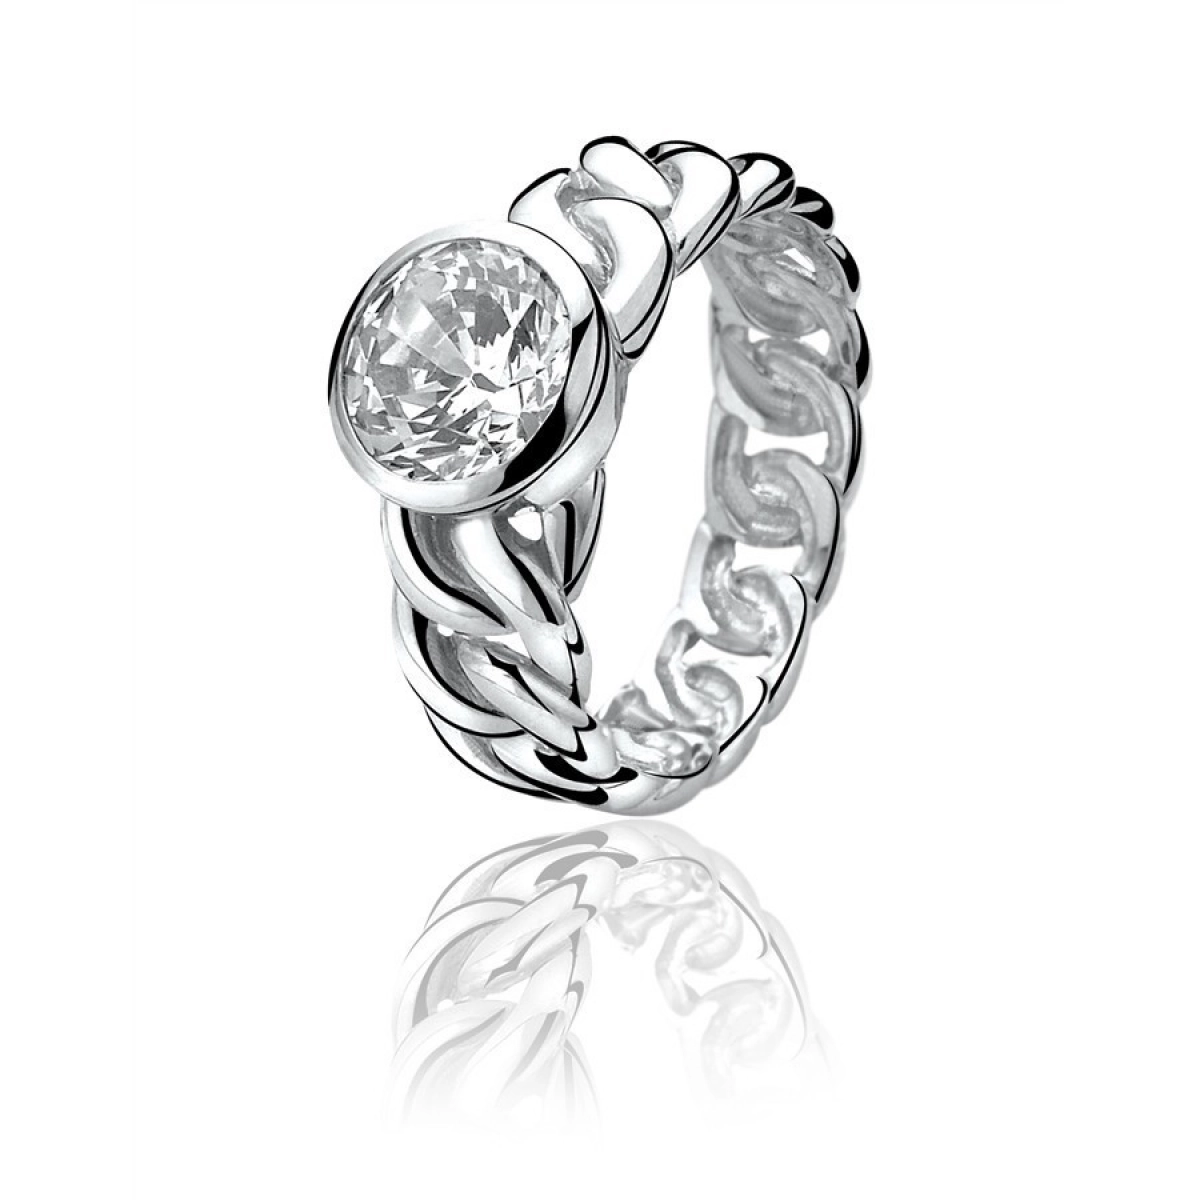 RING SILVER ZINZI RHODIUM-PLATED WITH LARGE CUBIC ZIRCONIA AND DISPLAYED IN THE FORM OF A LINK ZIR655